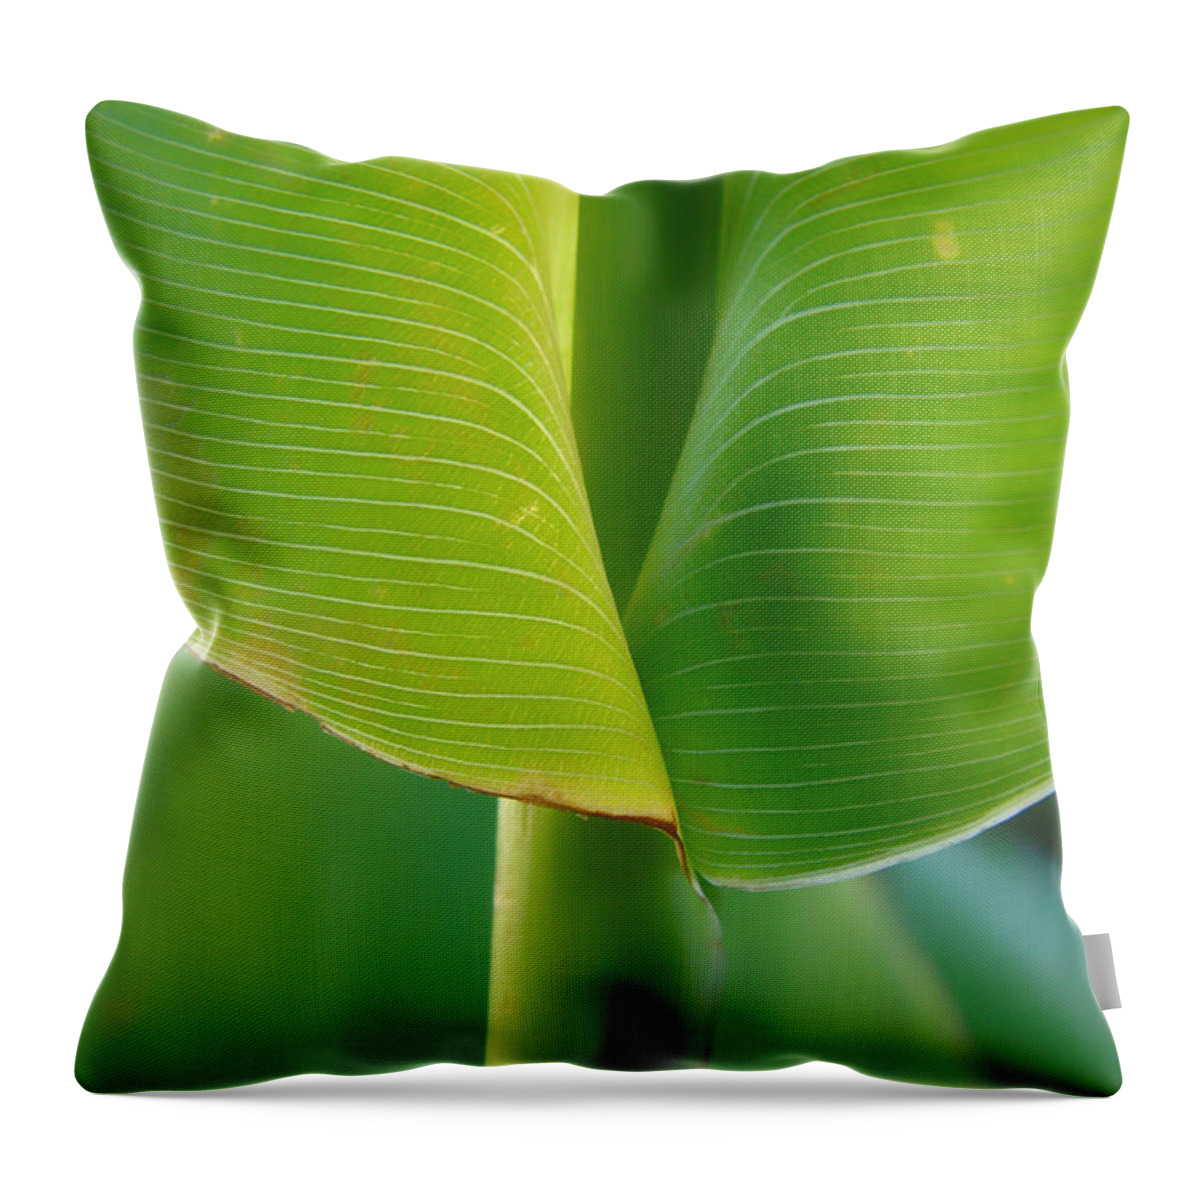 Tropical Throw Pillow featuring the photograph Tropical Green by Donna Blackhall